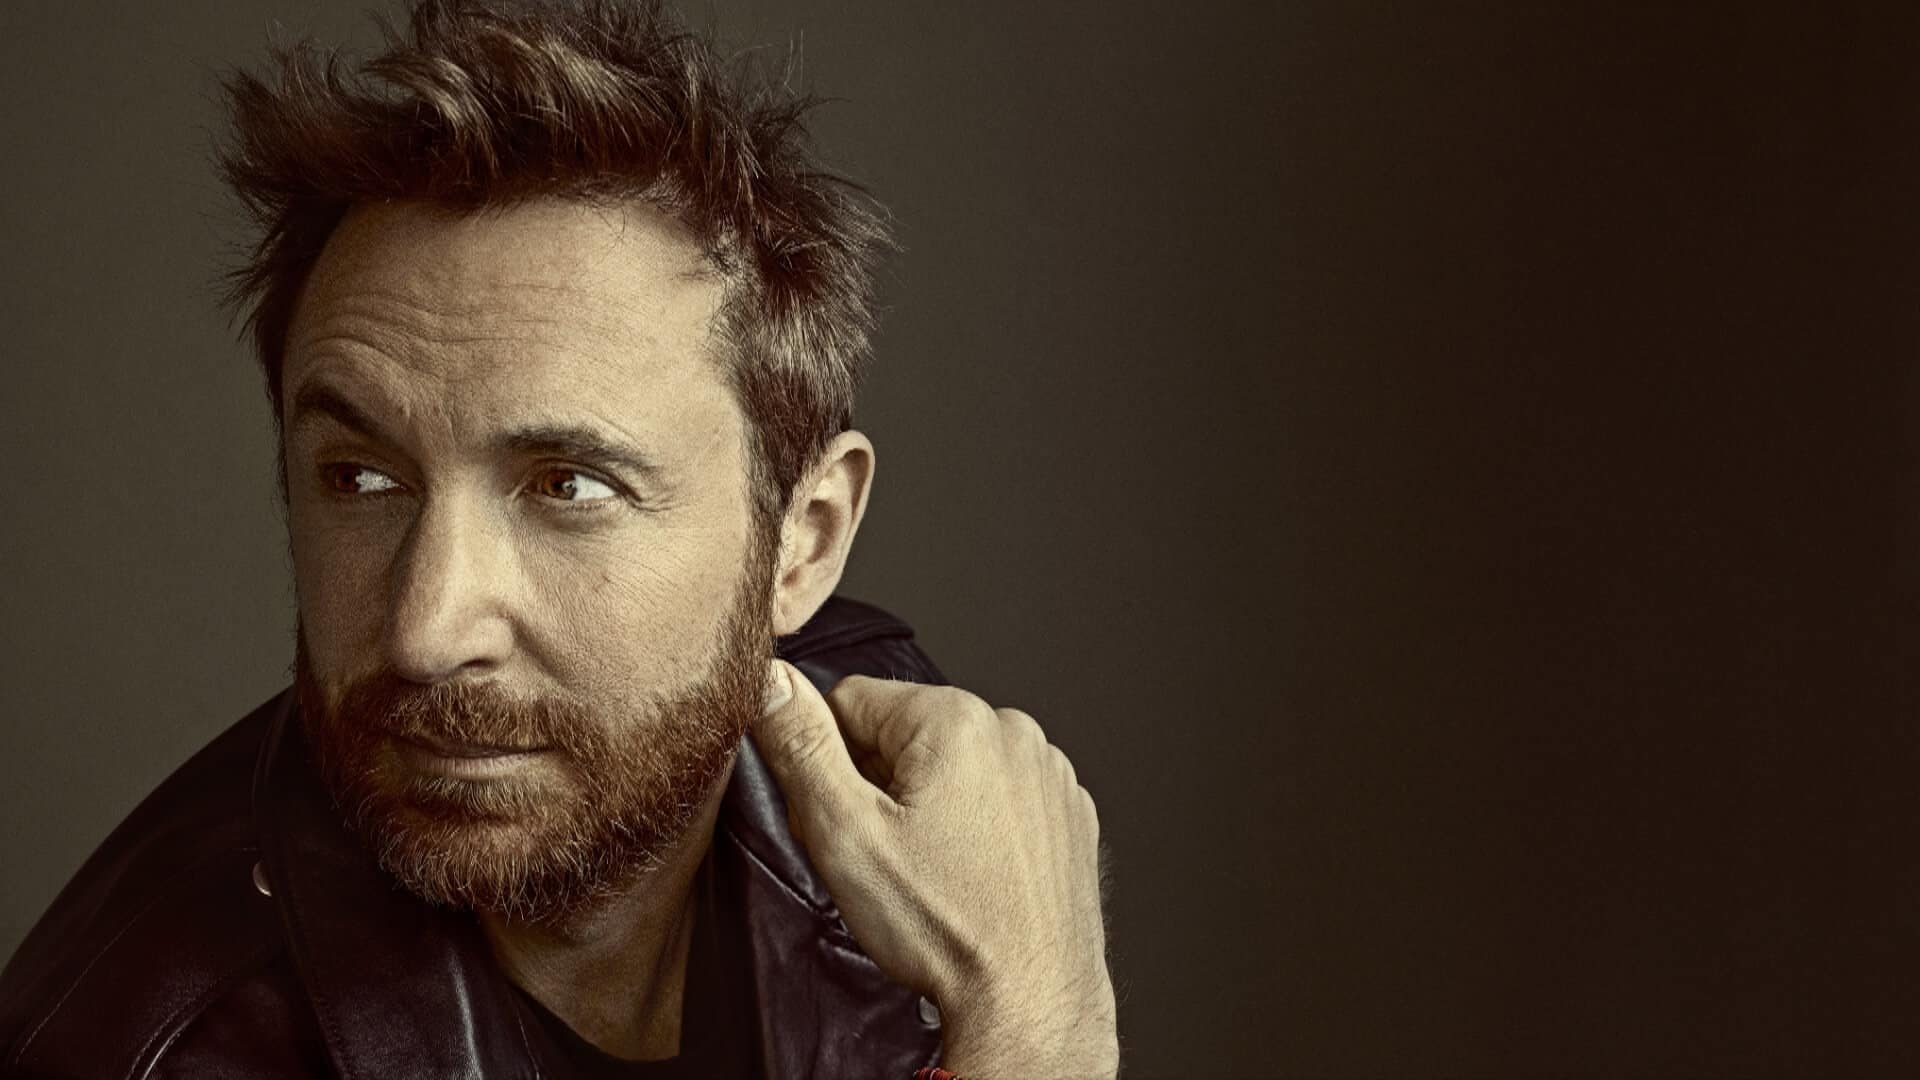 David Guetta to extend ‘United At Home’ series with upcoming Dubai performance